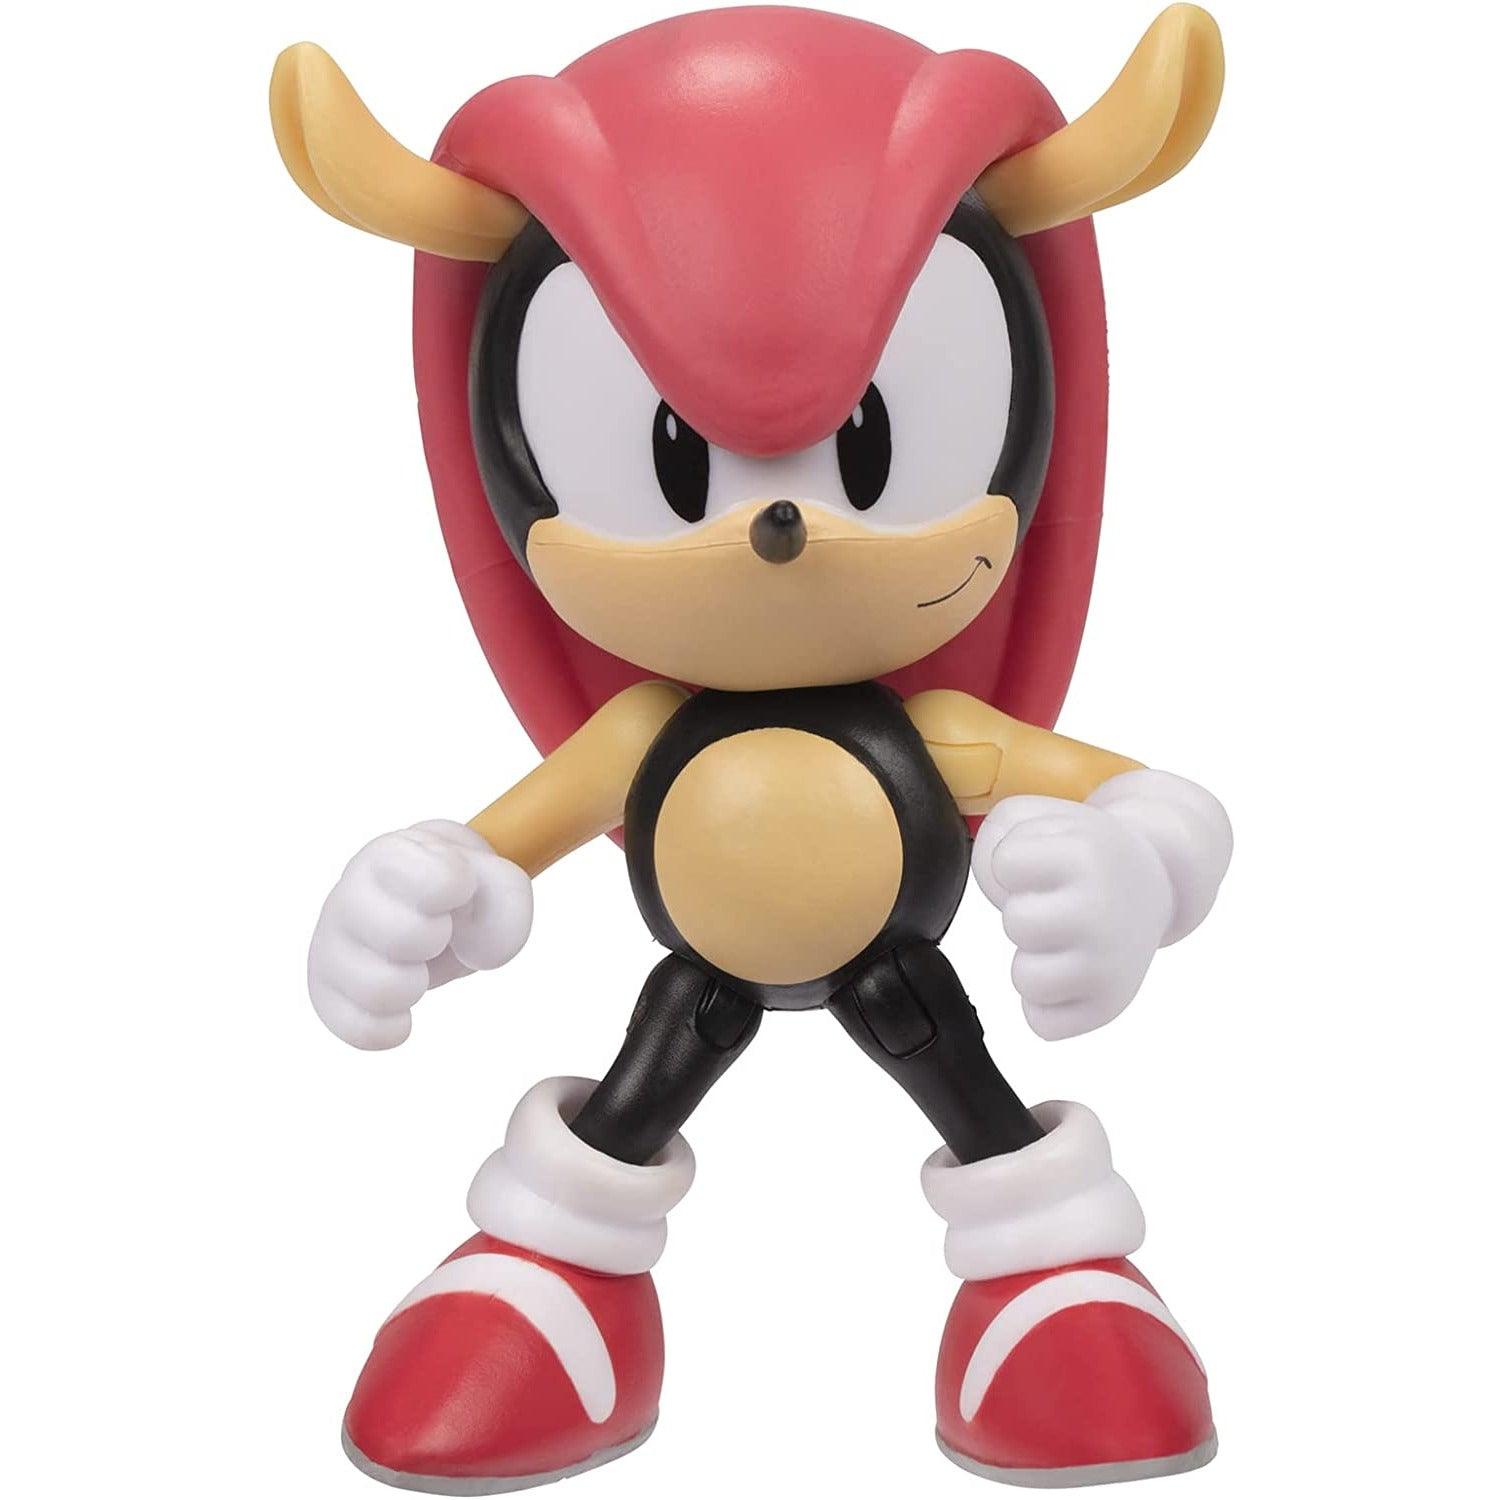 Sonic The Hedgehog 7 cm Action Figure Mighty Sonic - BumbleToys - 3+ years, 5-7 Years, 8-13 Years, Boys, OXE, Pre-Order, Sonic